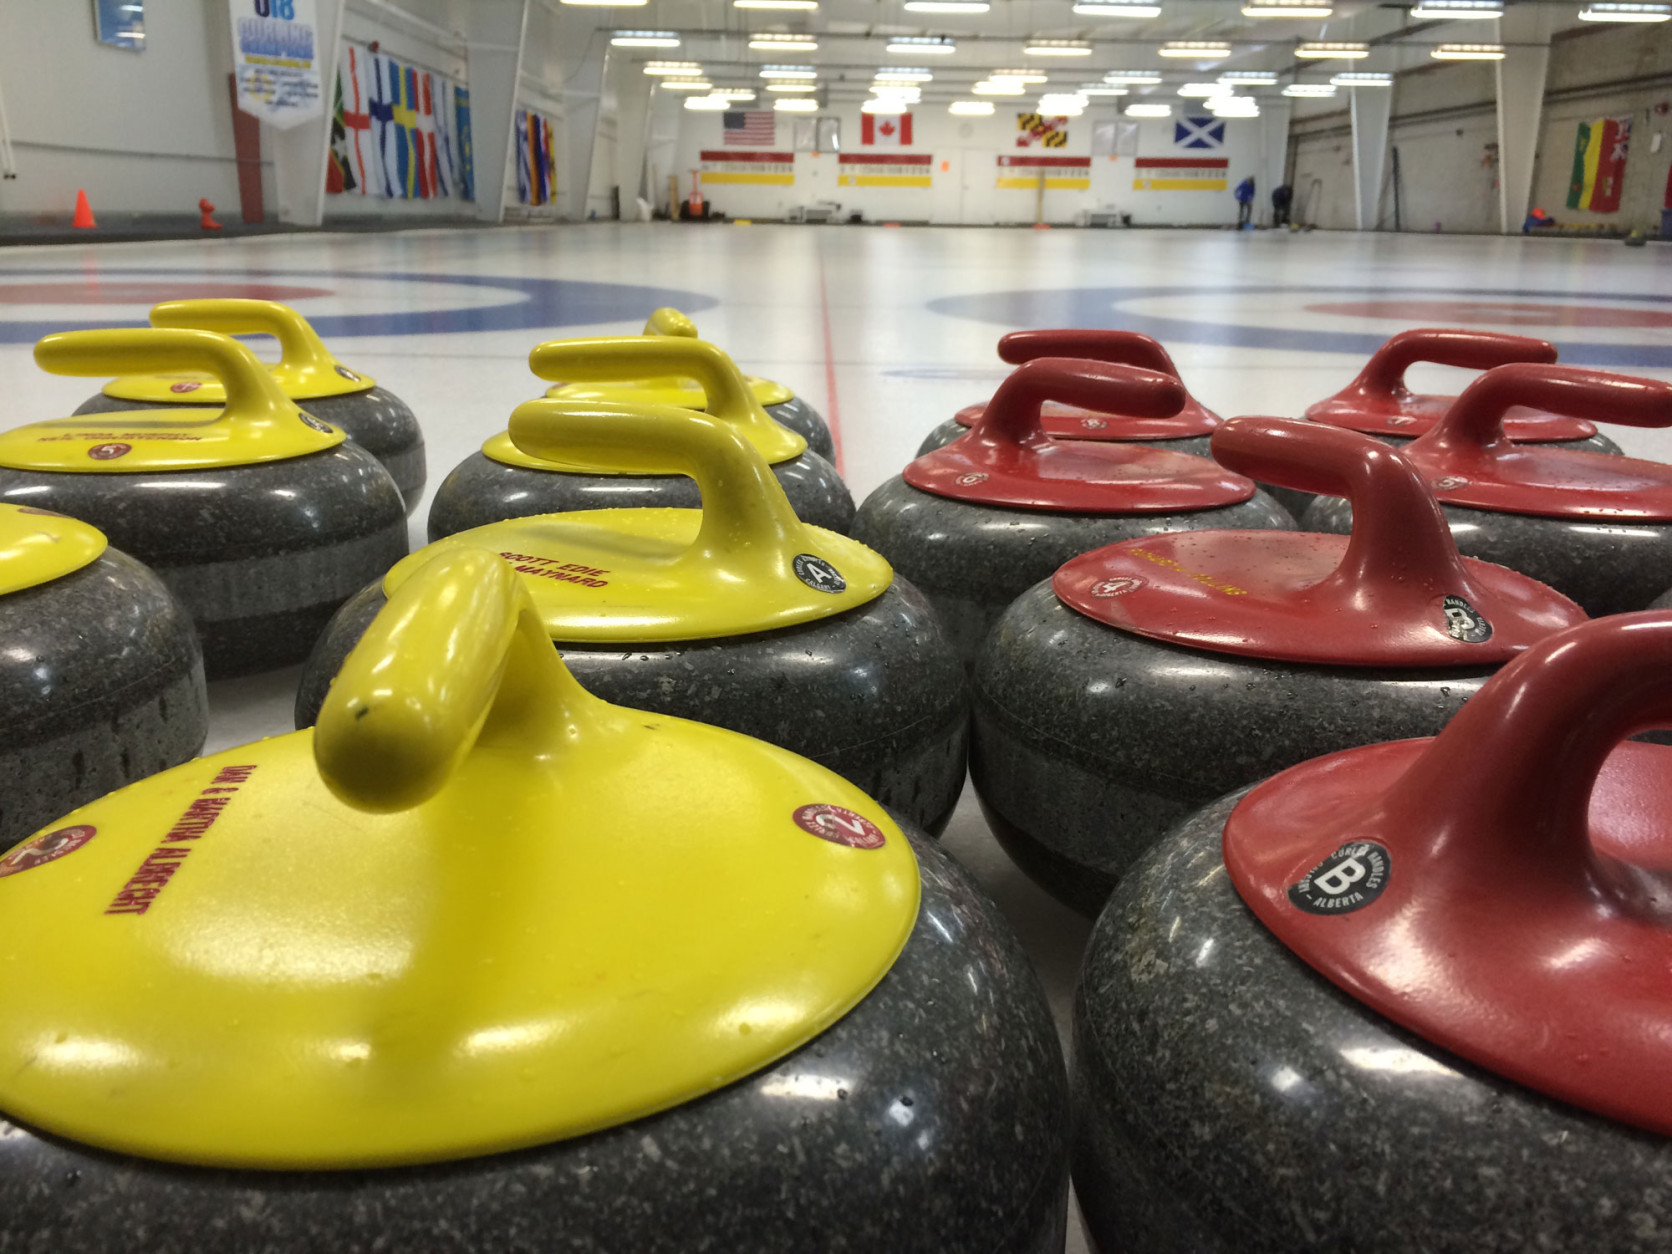 The Potomac Curling Club is a modest facility, but has over 300 full-time members and offers weekly instruction to new players. (WTOP/Noah Frank)